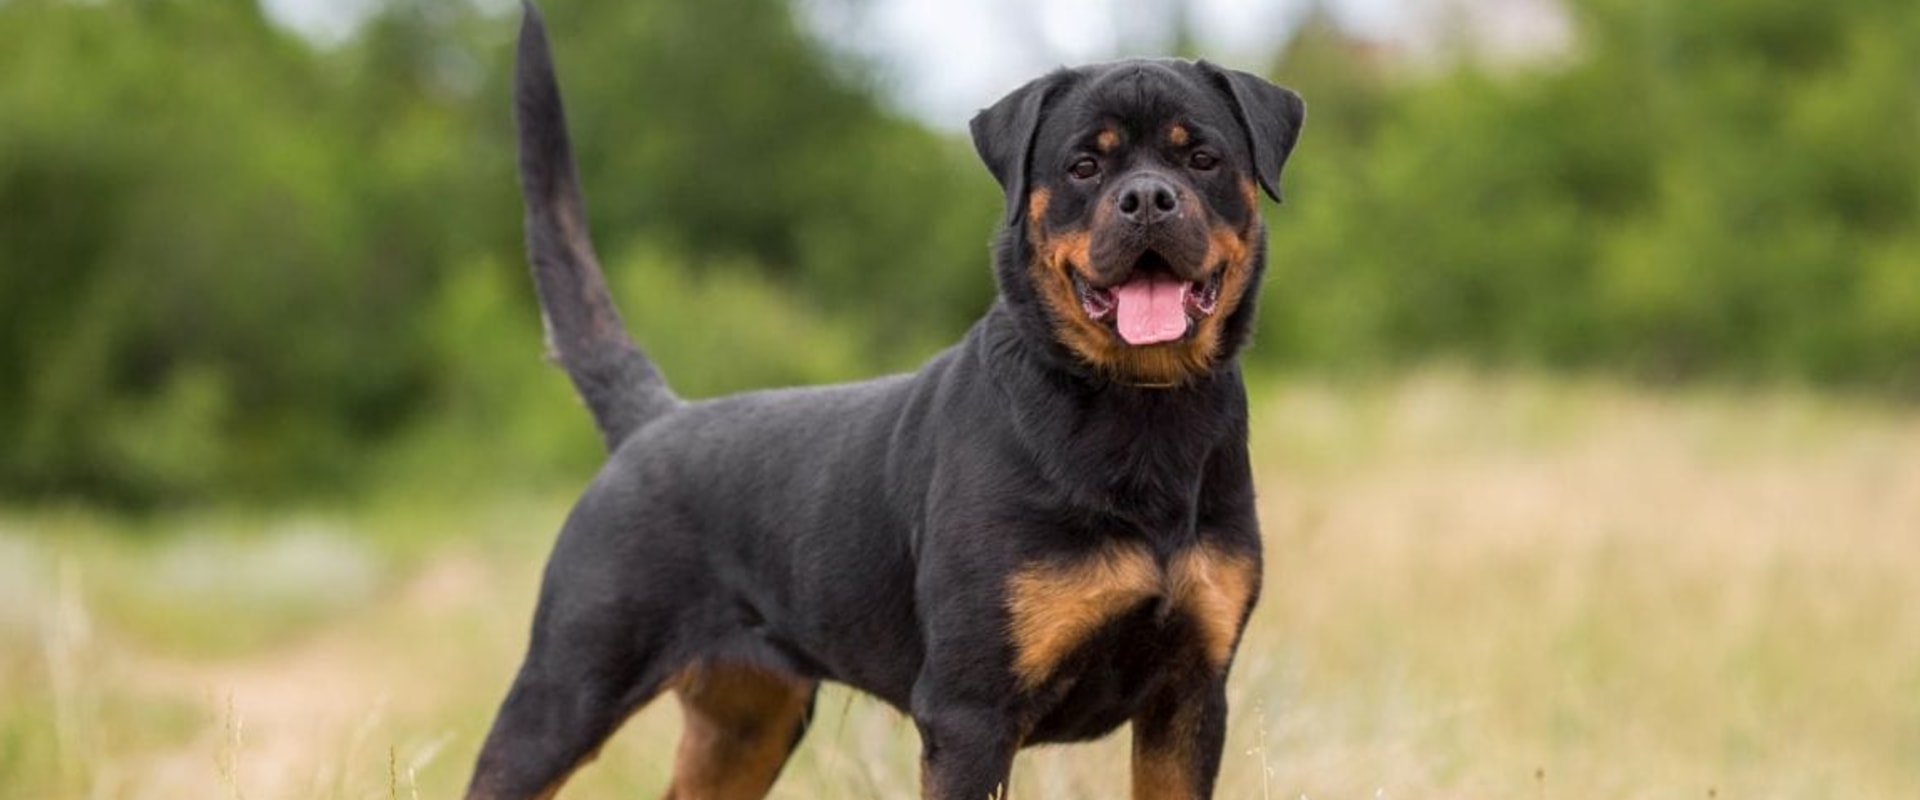 Rottweiler what's good about em?